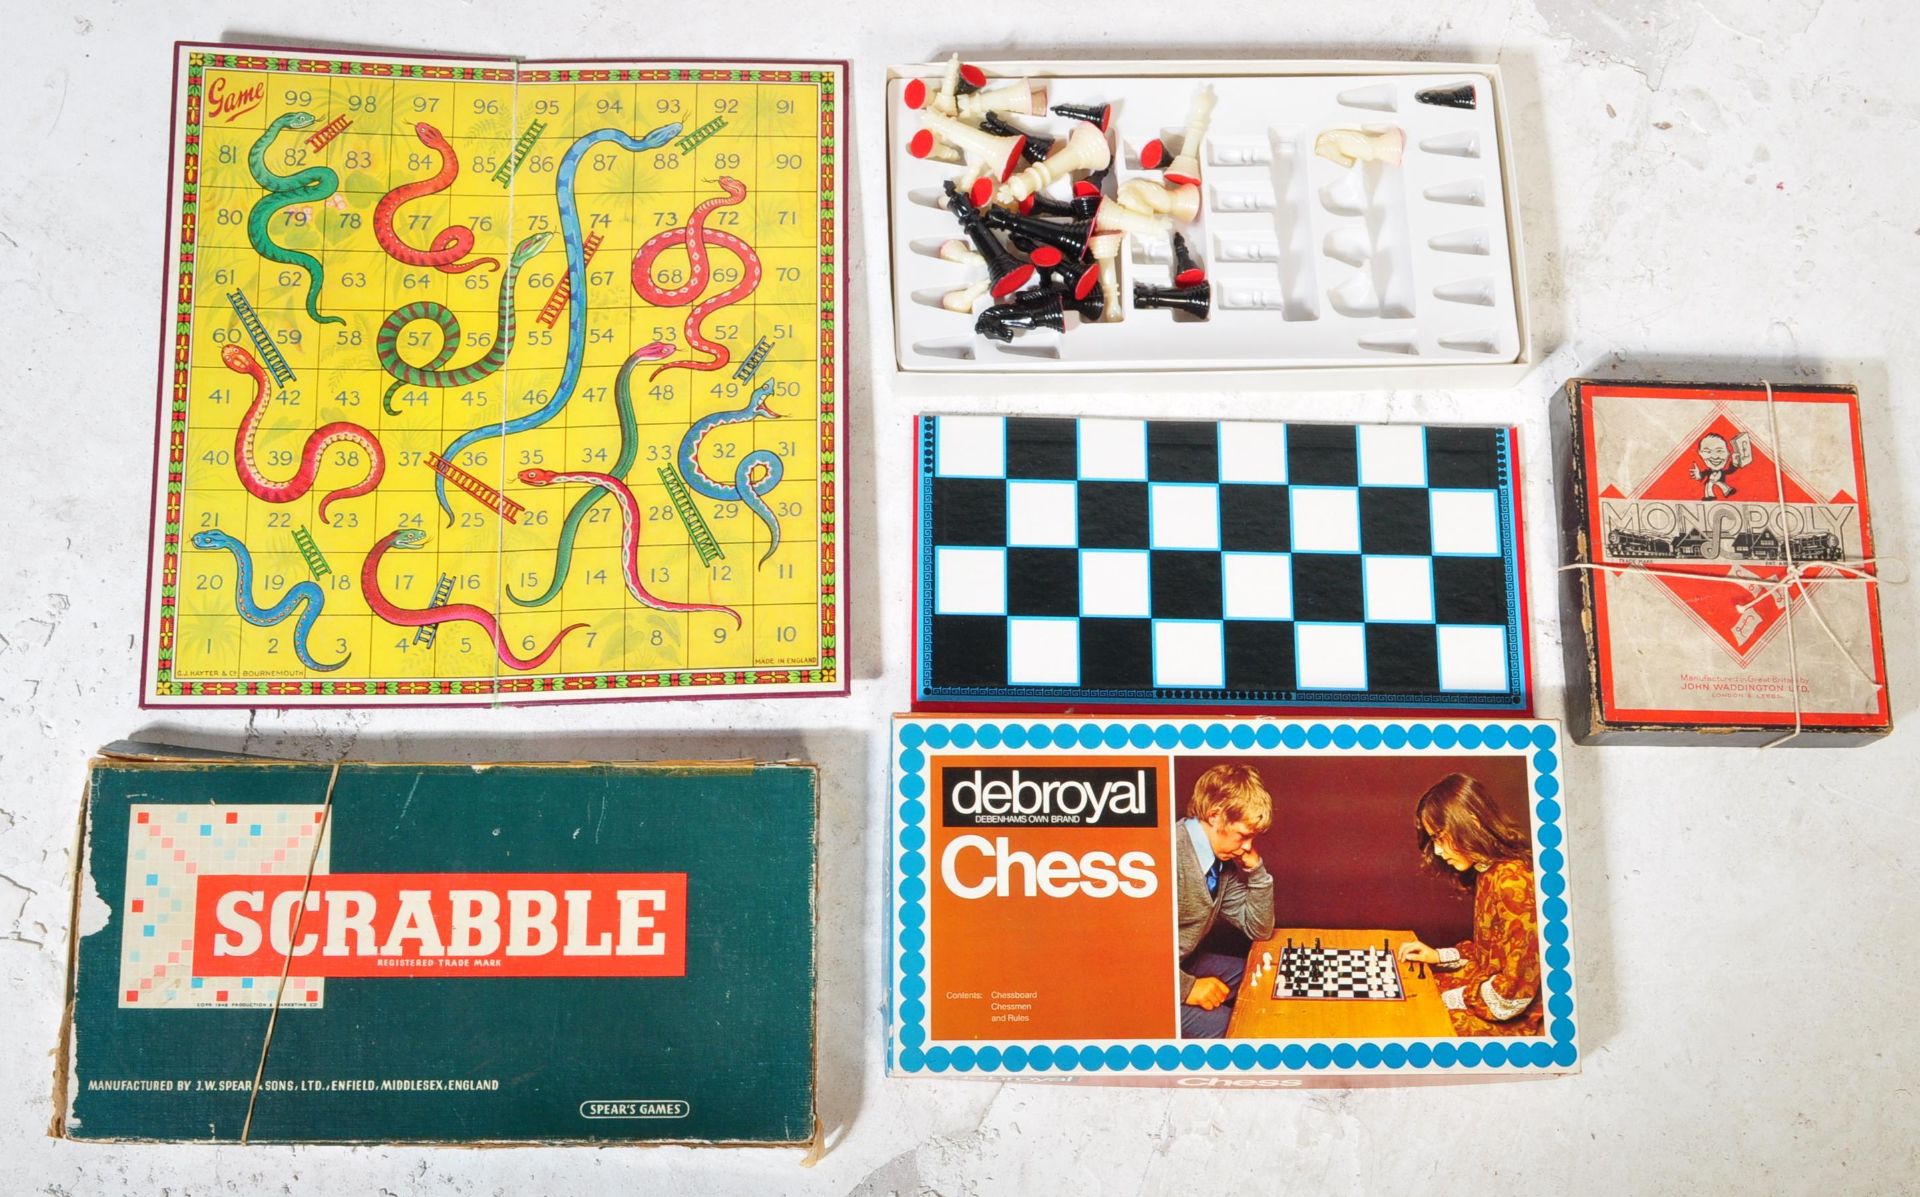 VINTAGE WOODEN CROQUET LAWN BOX & BOARD GAMES - Image 3 of 6